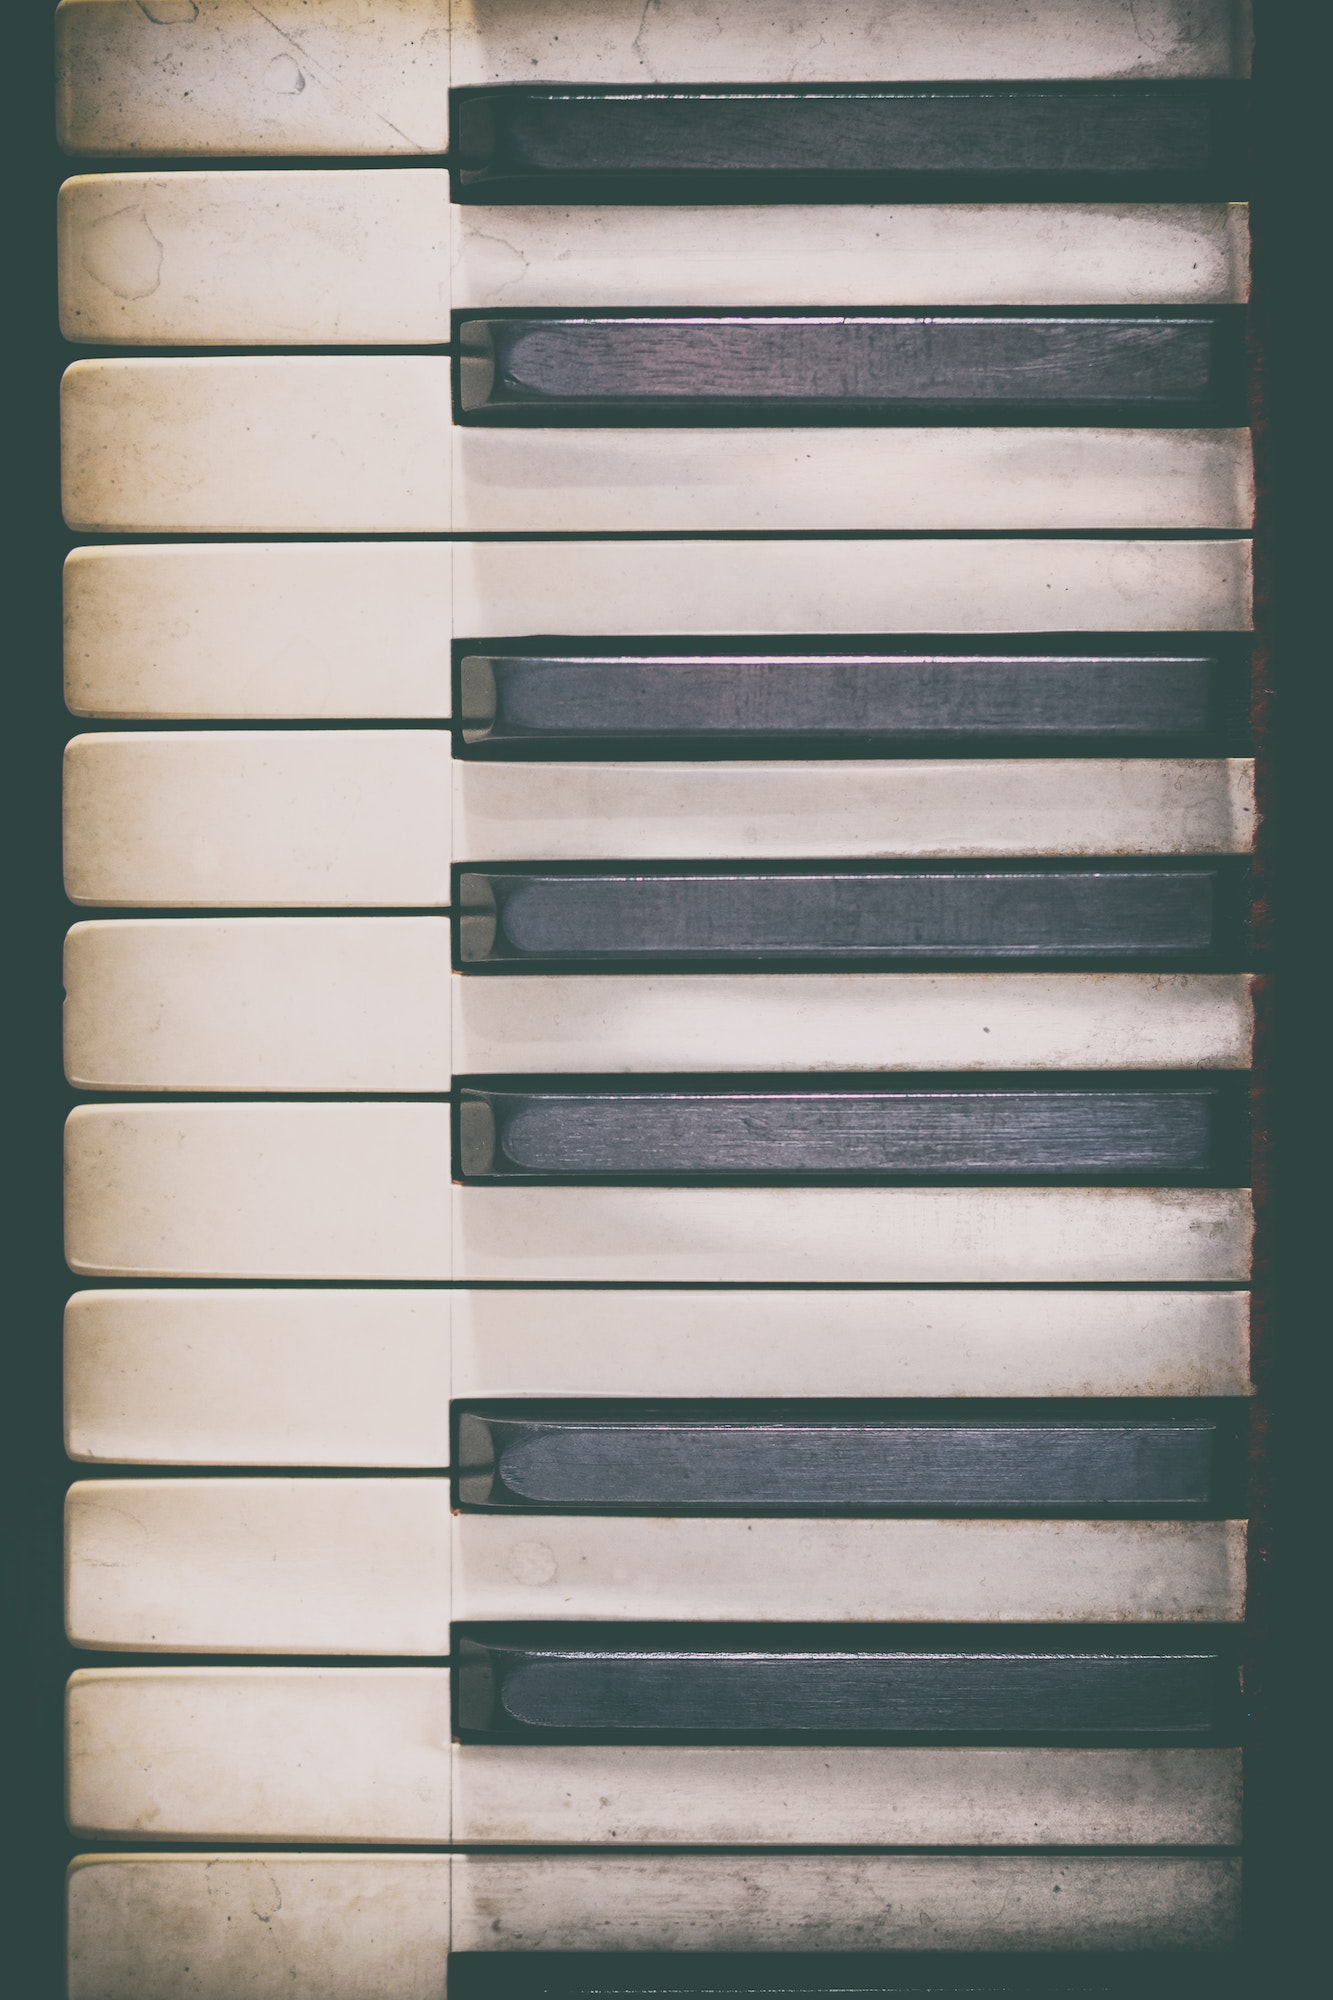 Piano keyboard of a classic wooden piano